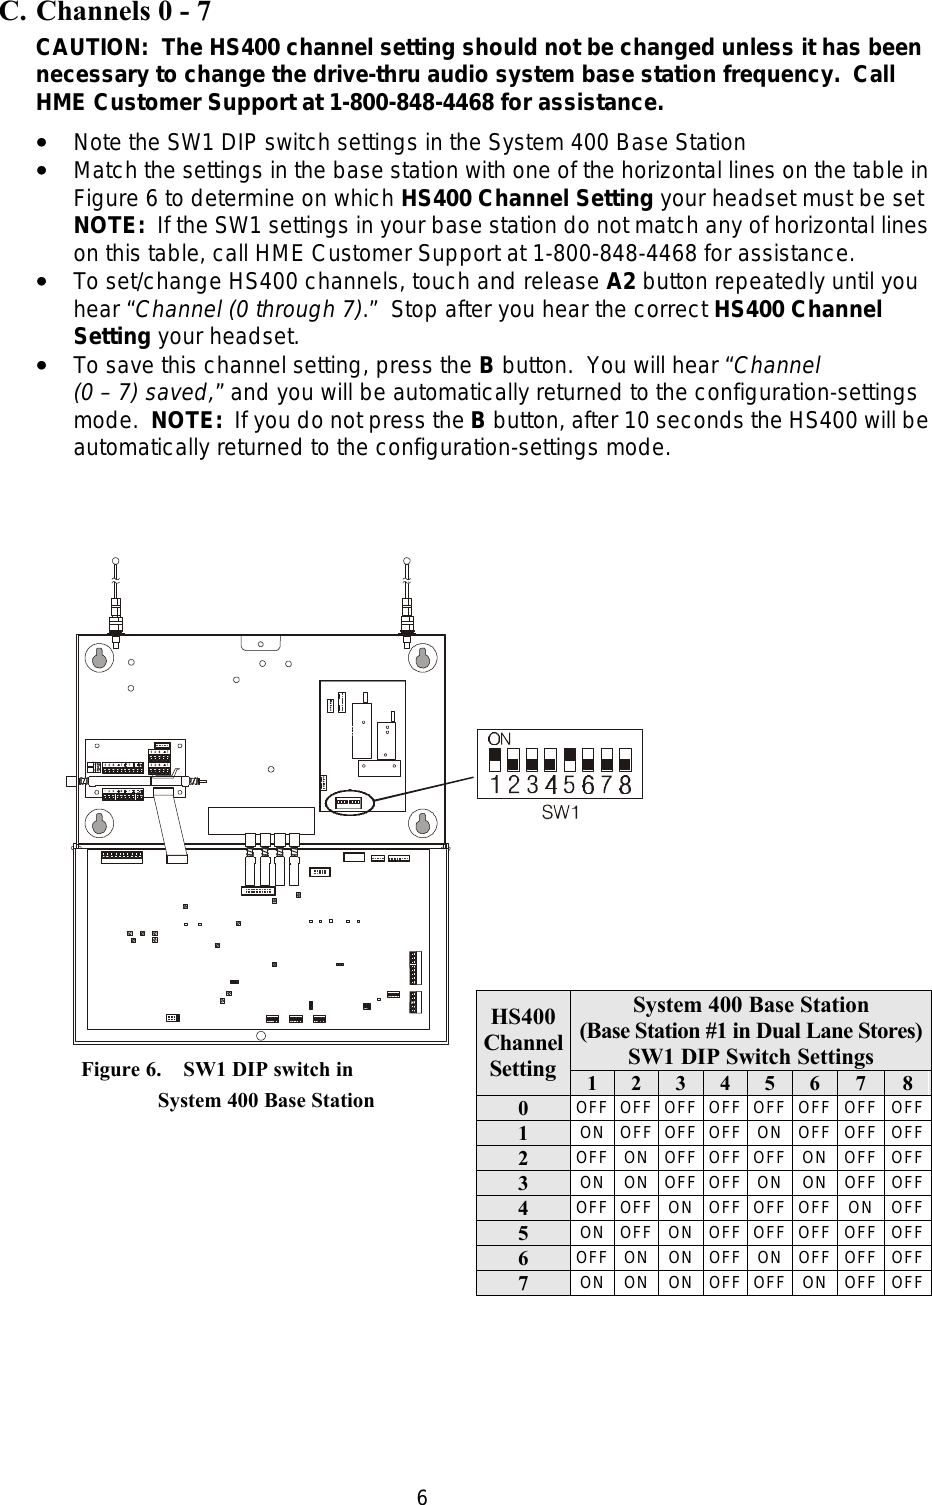  6C. Channels 0 - 7 CAUTION:  The HS400 channel setting should not be changed unless it has been necessary to change the drive-thru audio system base station frequency.  Call HME Customer Support at 1-800-848-4468 for assistance. ••   Note the SW1 DIP switch settings in the System 400 Base Station ••   Match the settings in the base station with one of the horizontal lines on the table in Figure 6 to determine on which HS400 Channel Setting your headset must be set NOTE:  If the SW1 settings in your base station do not match any of horizontal lines on this table, call HME Customer Support at 1-800-848-4468 for assistance. ••   To set/change HS400 channels, touch and release A2 button repeatedly until you hear “Channel (0 through 7).”  Stop after you hear the correct HS400 Channel Setting your headset. ••   To save this channel setting, press the B button.  You will hear “Channel  (0 – 7) saved,” and you will be automatically returned to the configuration-settings mode.  NOTE:  If you do not press the B button, after 10 seconds the HS400 will be automatically returned to the configuration-settings mode.      System 400 Base Station (Base Station #1 in Dual Lane Stores) SW1 DIP Switch Settings HS400 Channel Setting 1 2 3 4 5 6 7 8 0 OFF OFF OFF OFF OFF OFF OFF OFF 1 ON OFF OFF OFF ON OFF OFF OFF 2 OFF ON OFF OFF OFF ON OFF OFF 3 ON ON OFF OFF ON ON OFF OFF 4 OFF OFF ON OFF OFF OFF ON OFF 5 ON OFF ON OFF OFF OFF OFF OFF 6 OFF ON ON OFF ON OFF OFF OFF 7 ON ON ON OFF OFF ON OFF OFF Figure 6.    SW1 DIP switch in               System 400 Base Station 